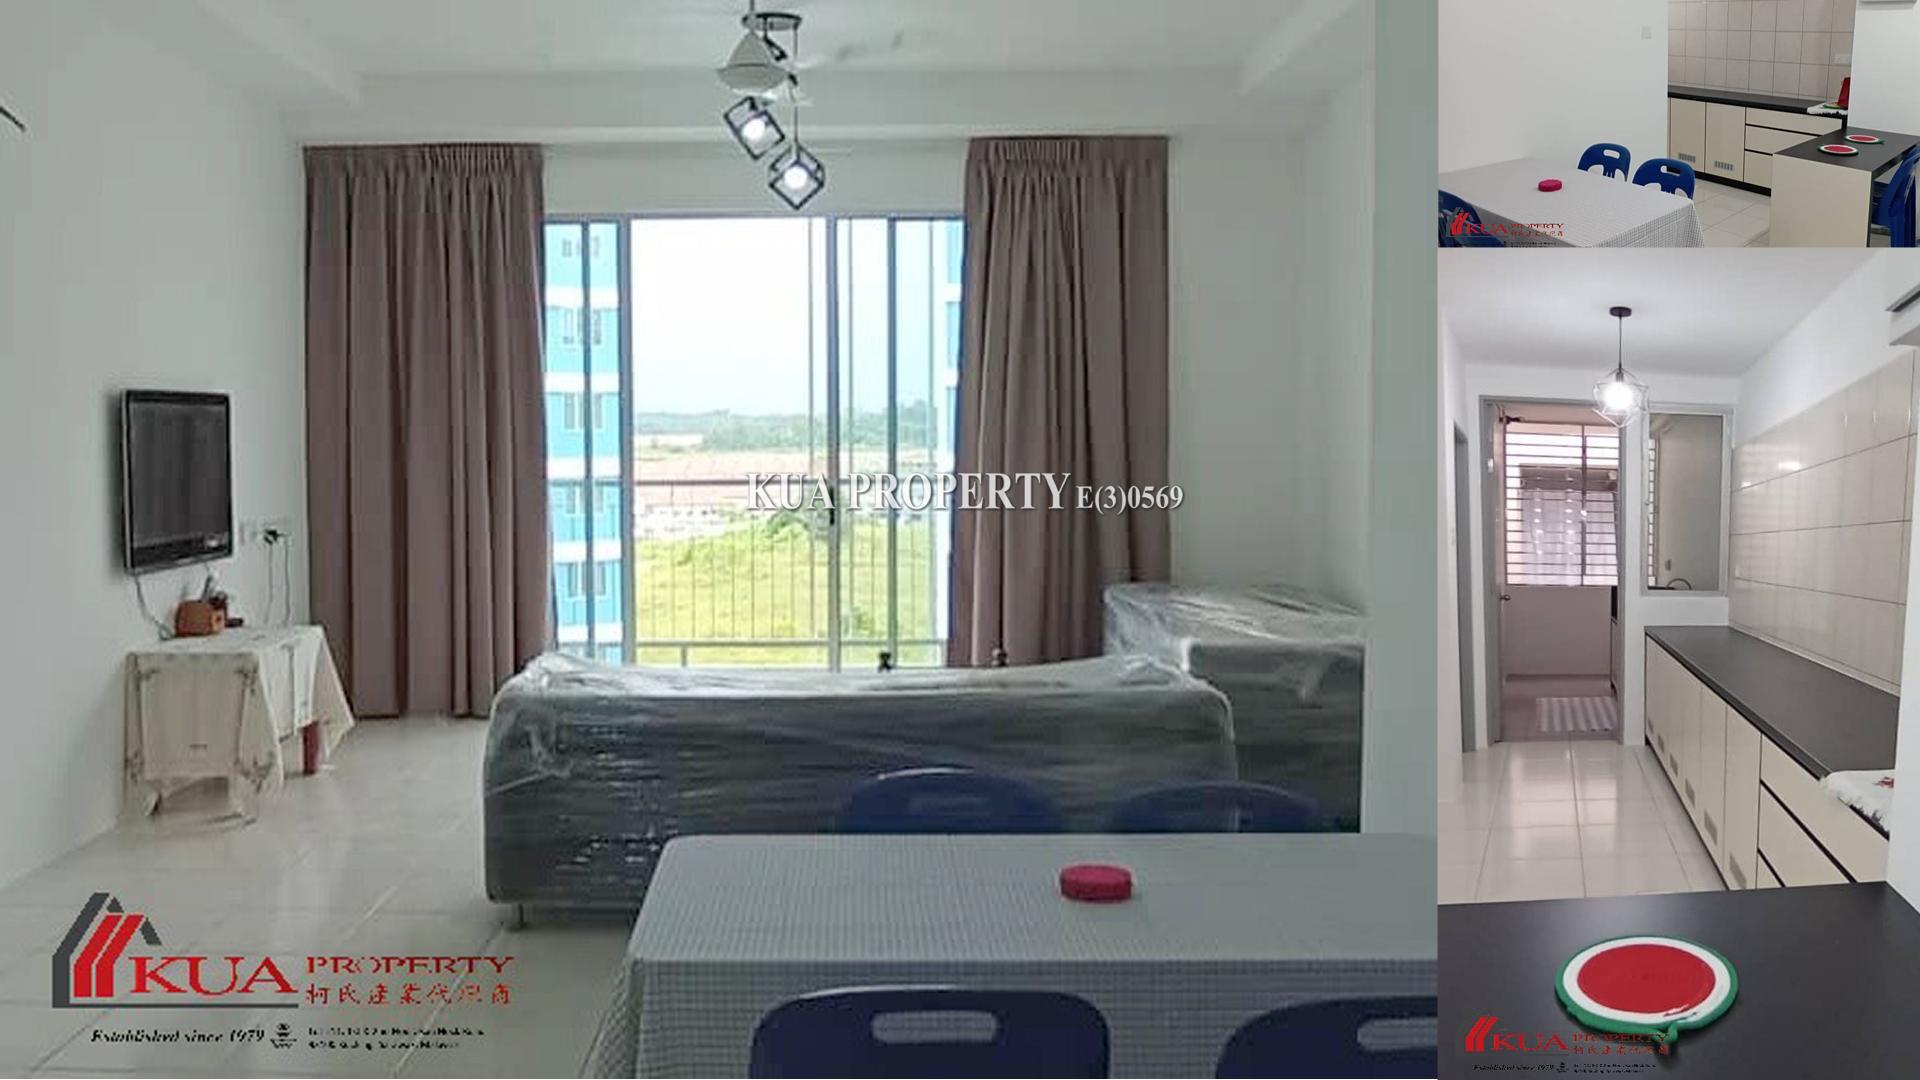 Ike Village Apartment (Brand New) For Rent(NOT AVAILABLE FOR STUDENT) Located at Samarahan